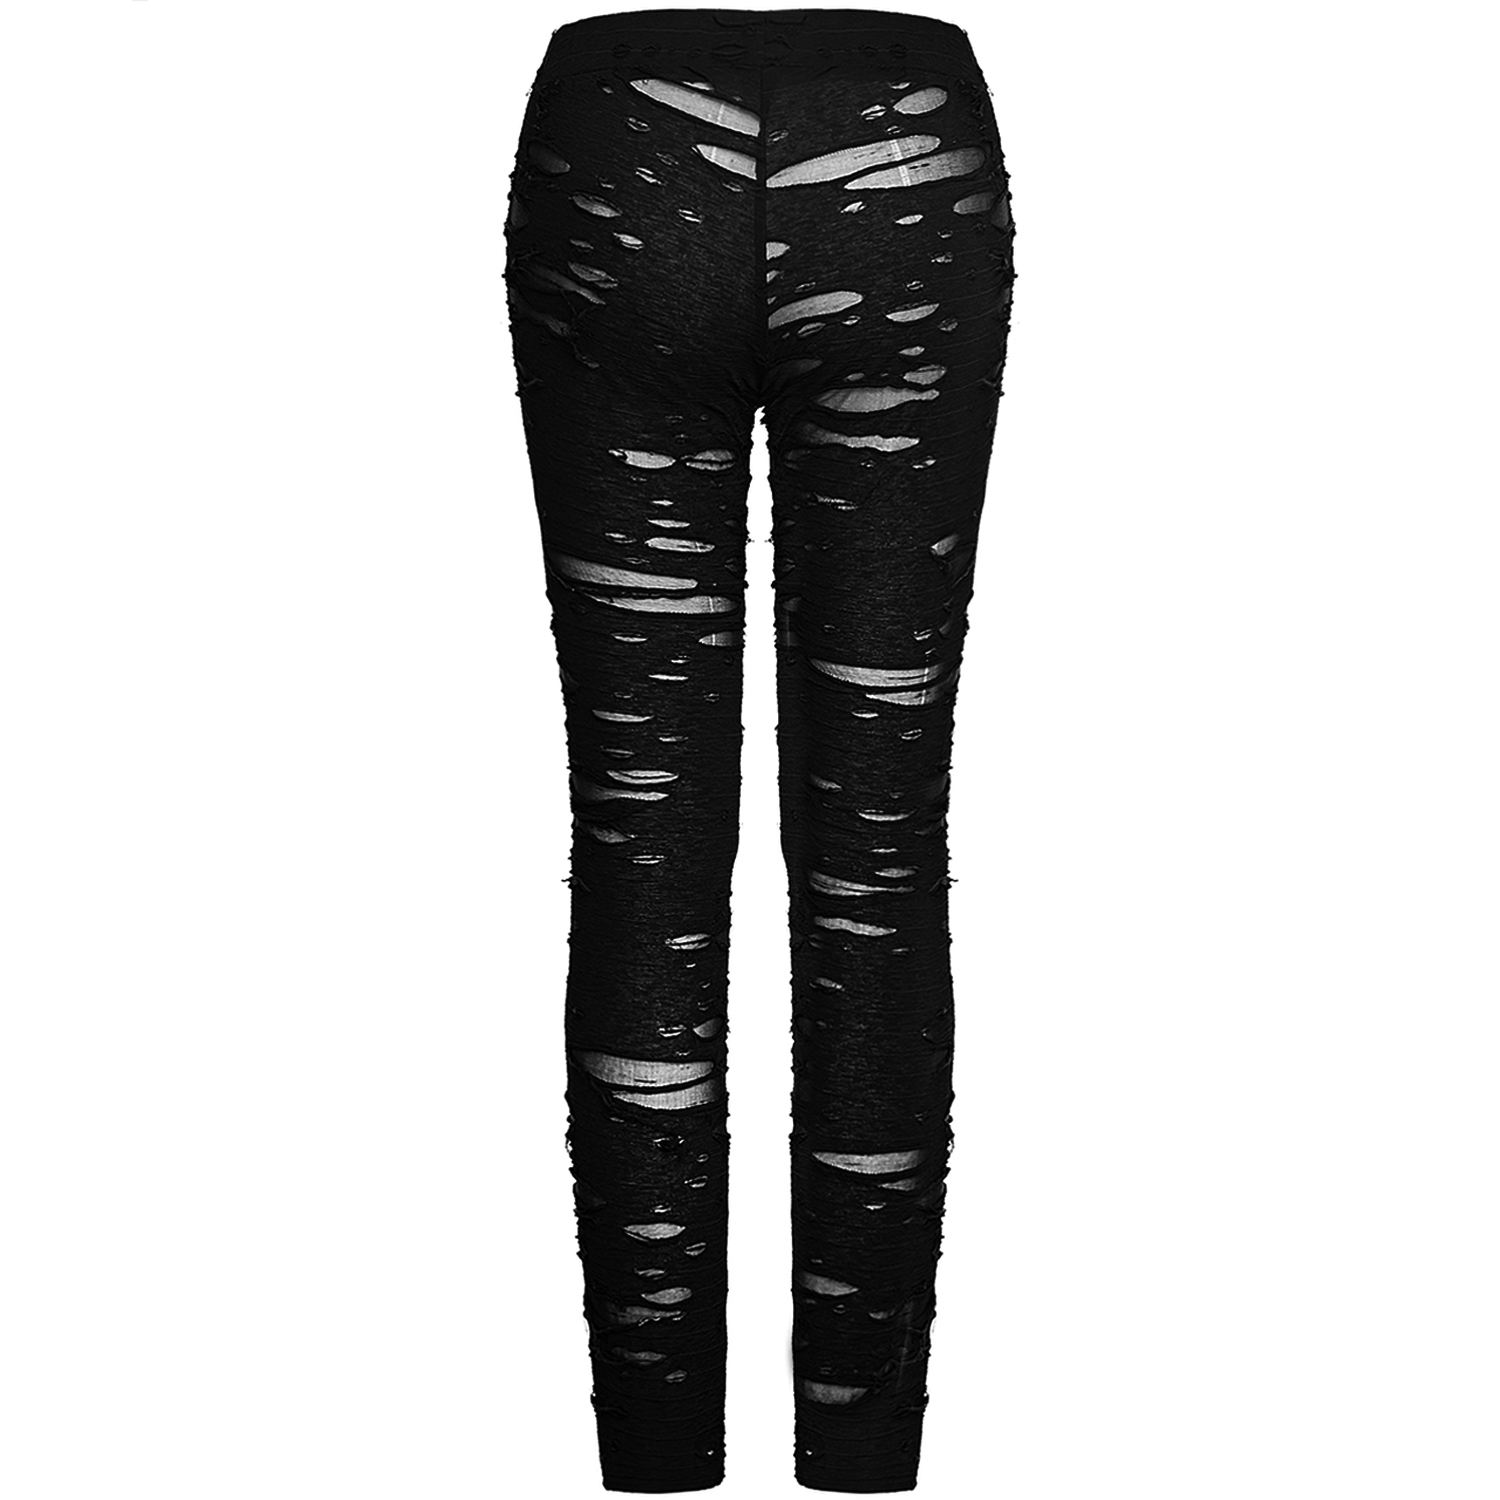 Black 'Ripped Off' Leggings by Punk Rave • the dark store™